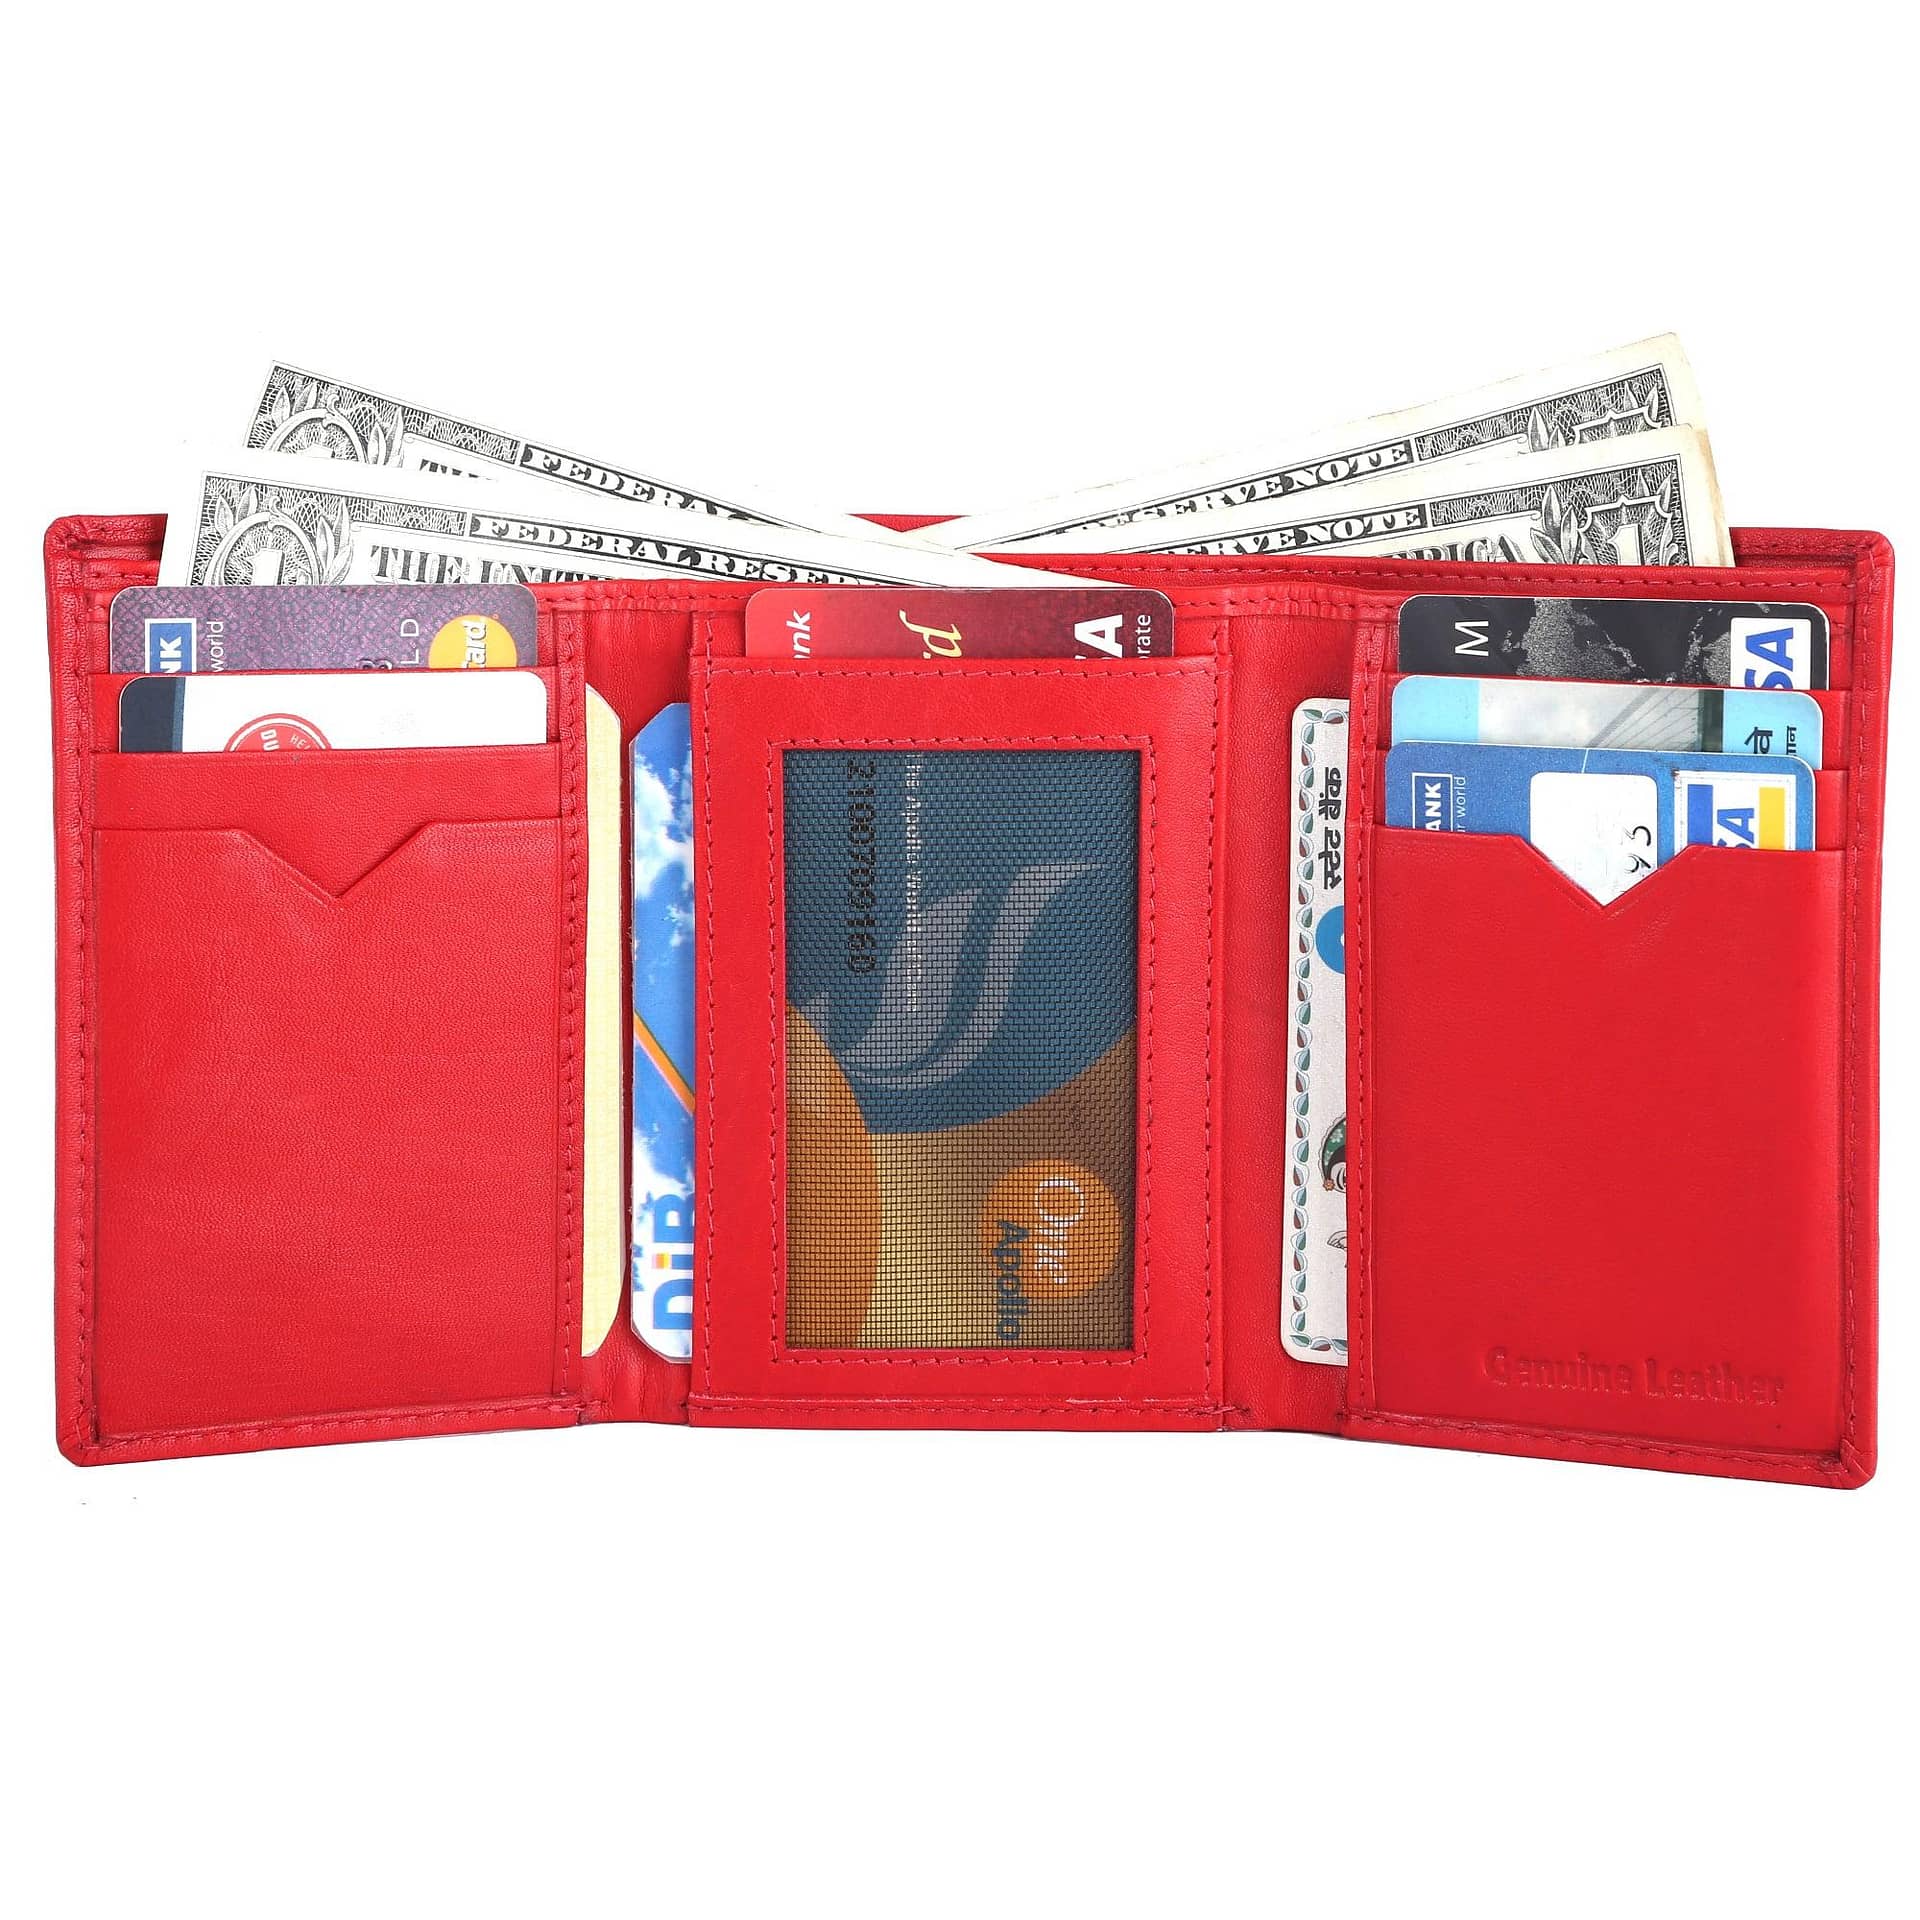 RFID Blocking Trifold Genuine Leather Wallet For Men And Women With ID Window | Tomato Red